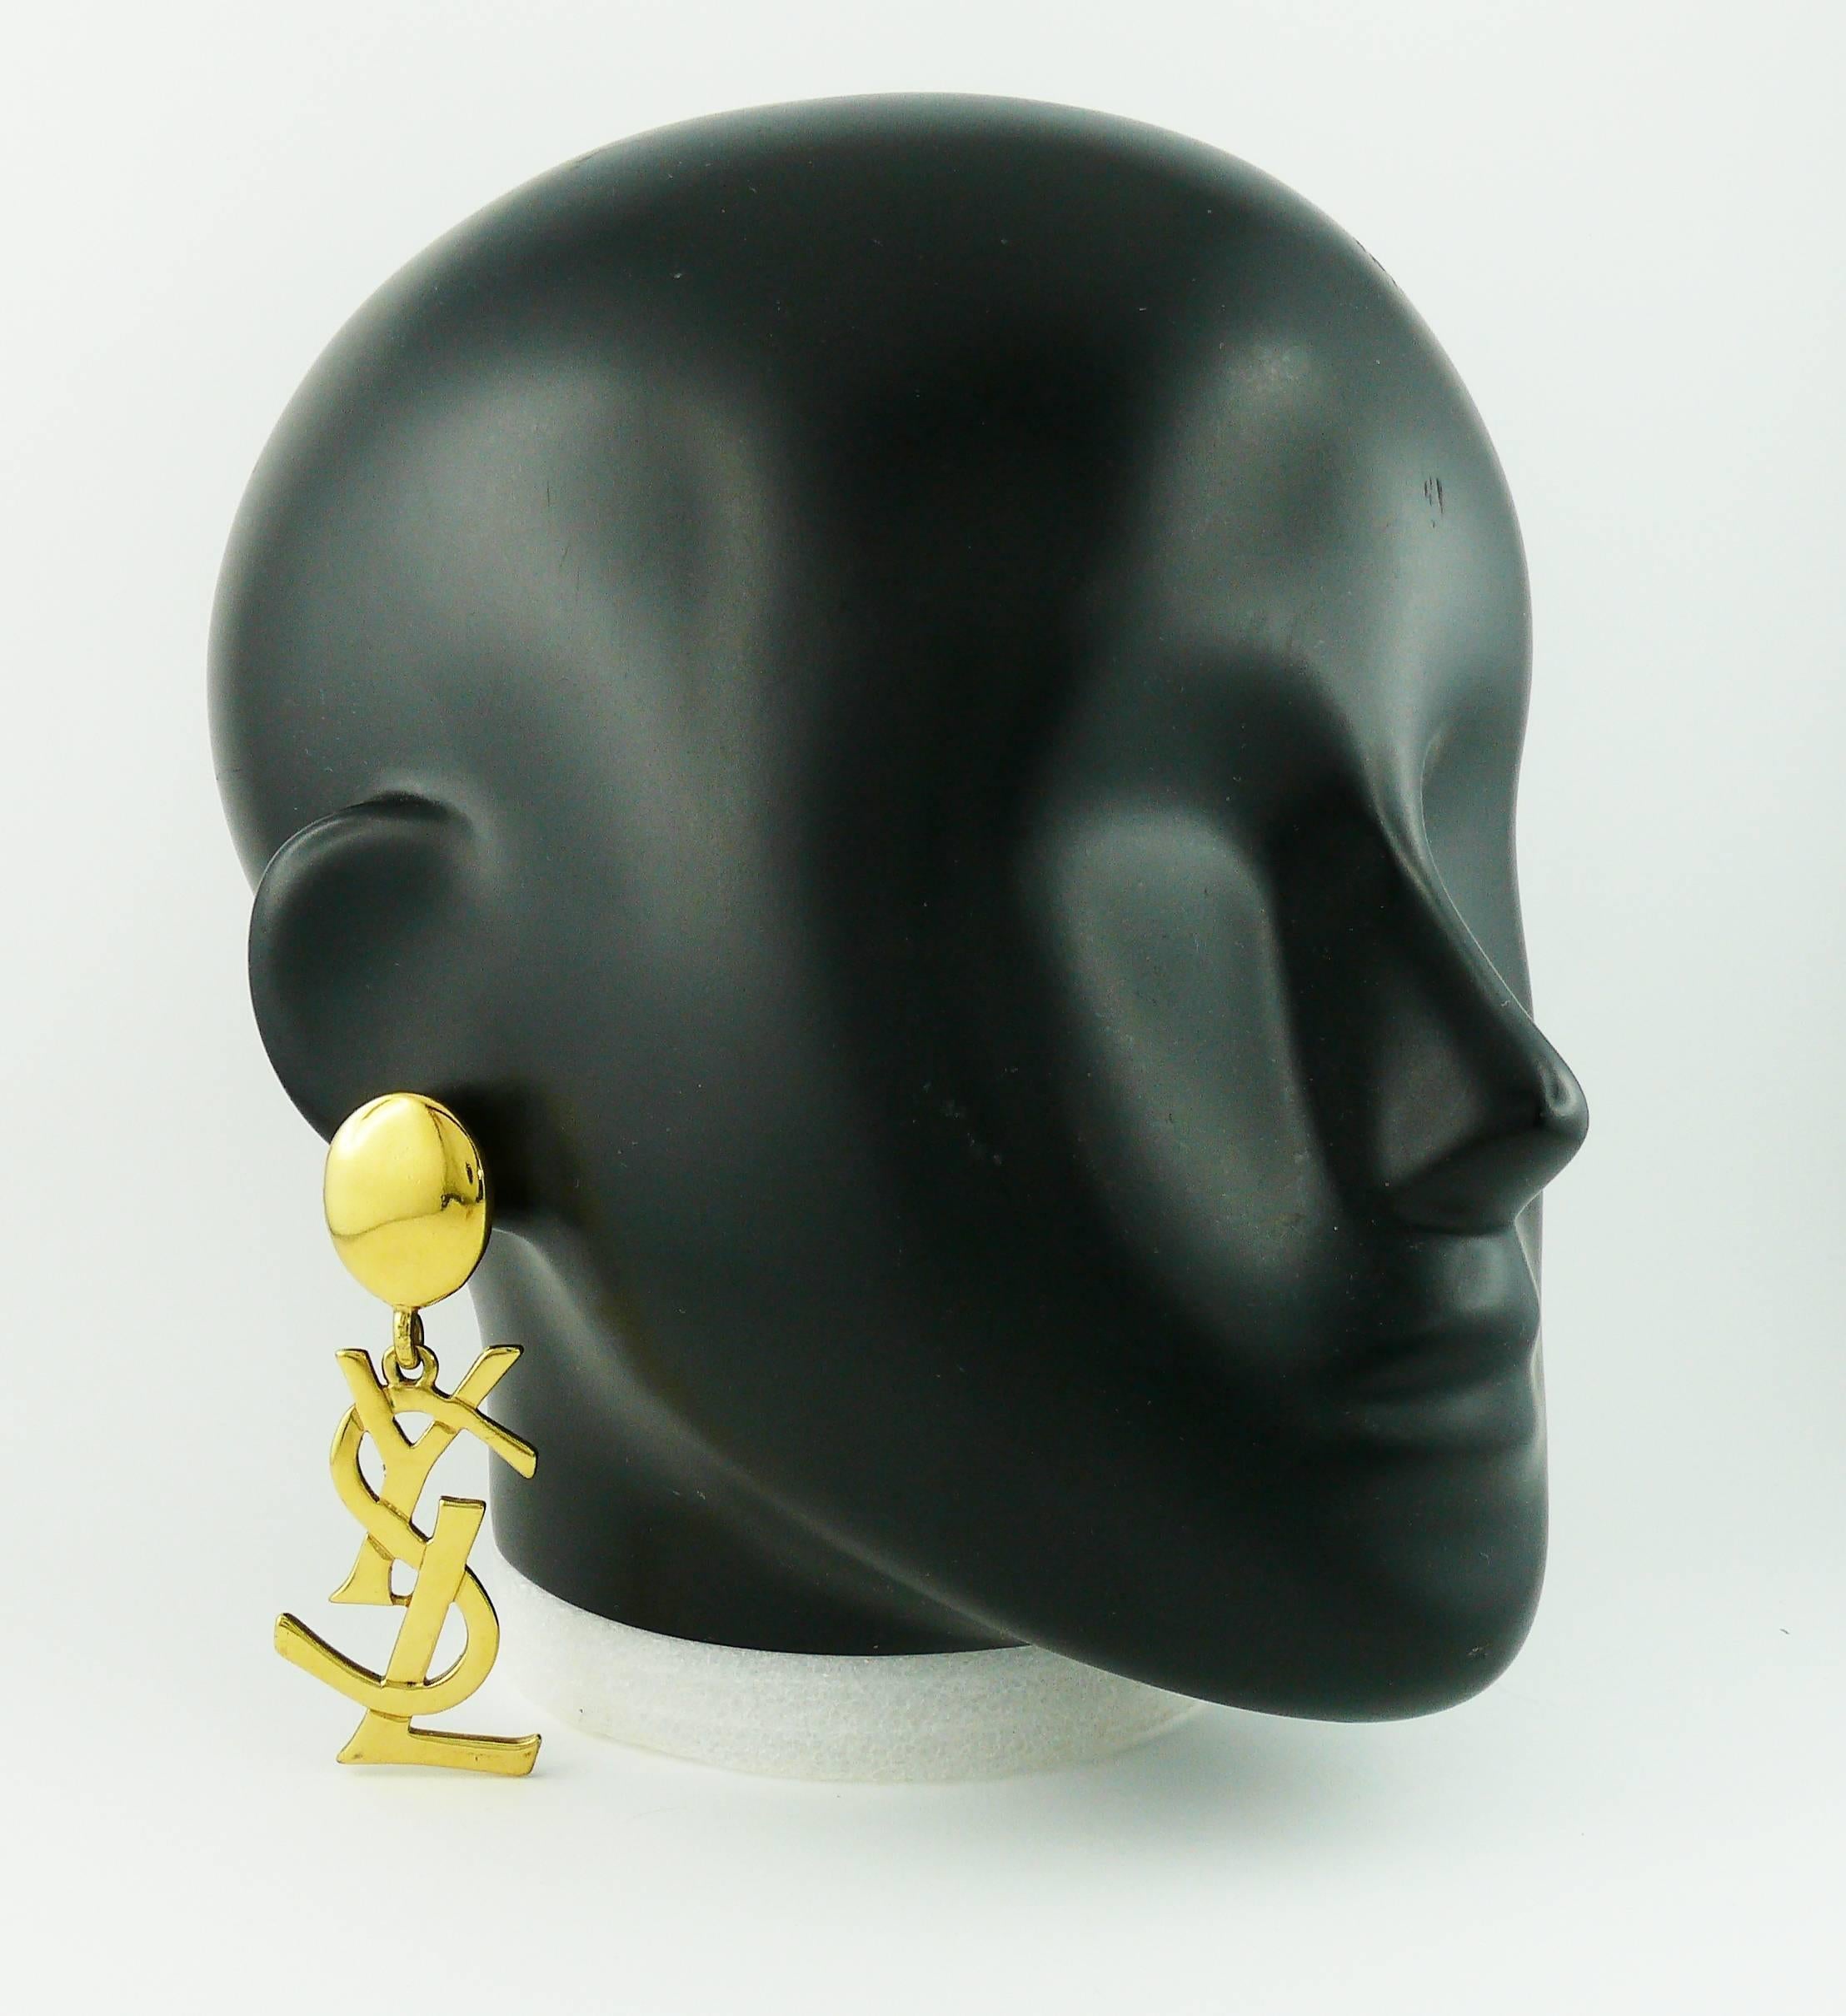 YVES SAINT LAURENT massive vintage gold toned iconic logo dangling earrings (clip on).

Rare and collectable item !

As seen on SAMANTHA JONES in SATC 2.

Marked YSL Made in France.

JEWELRY CONDITION CHART
- New or never worn : item is in